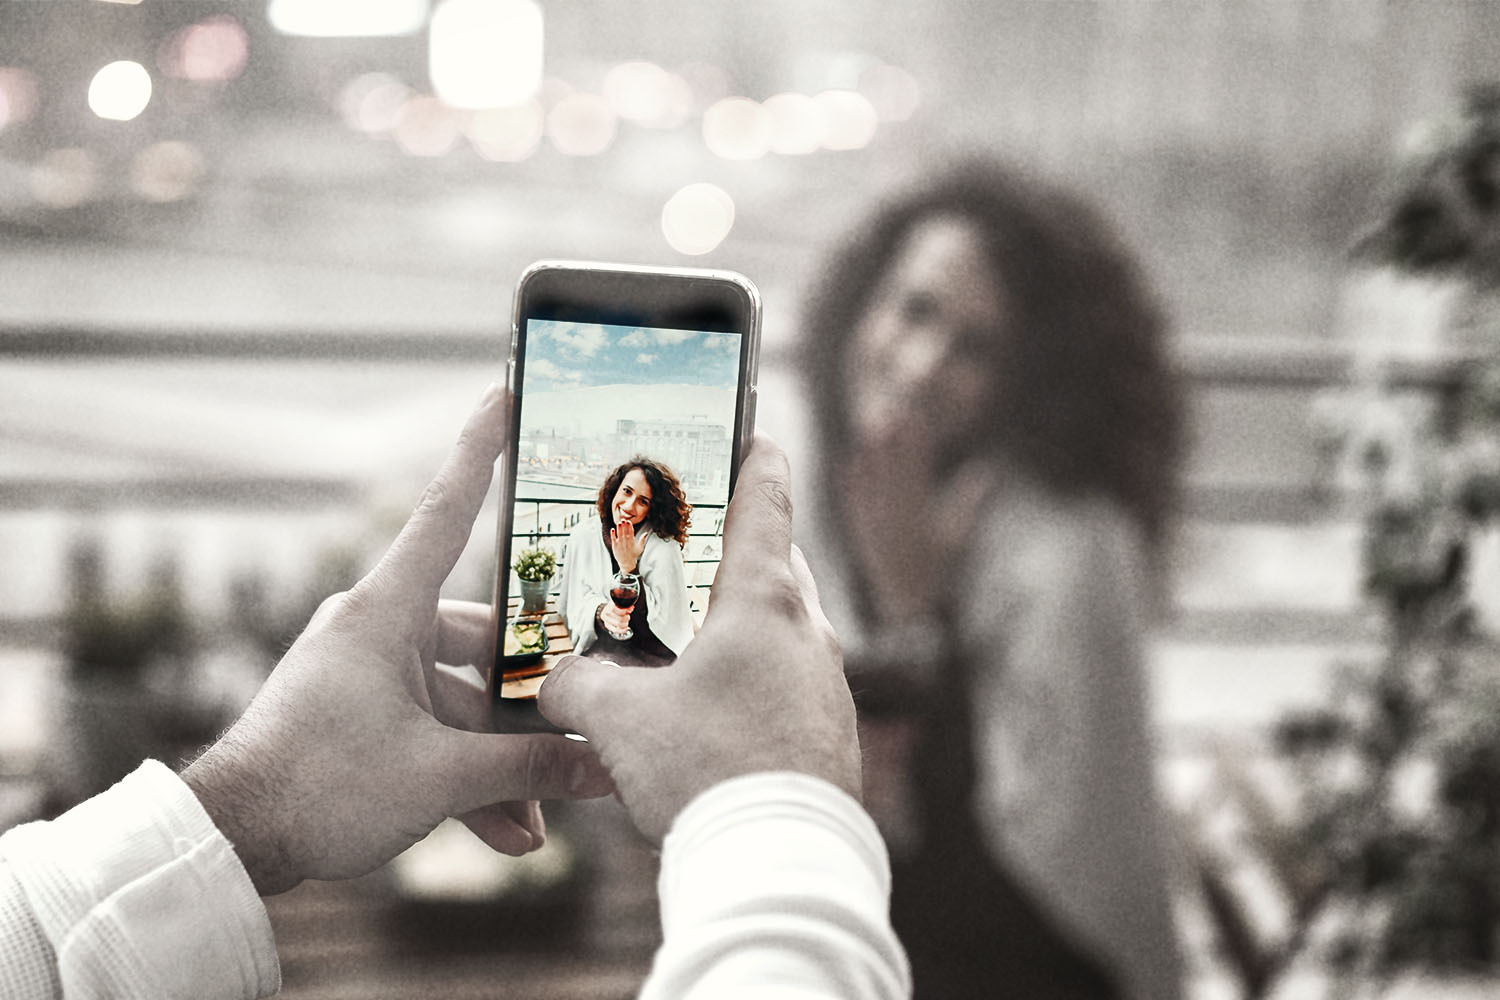 A man takes a photo of a woman on a smartphone